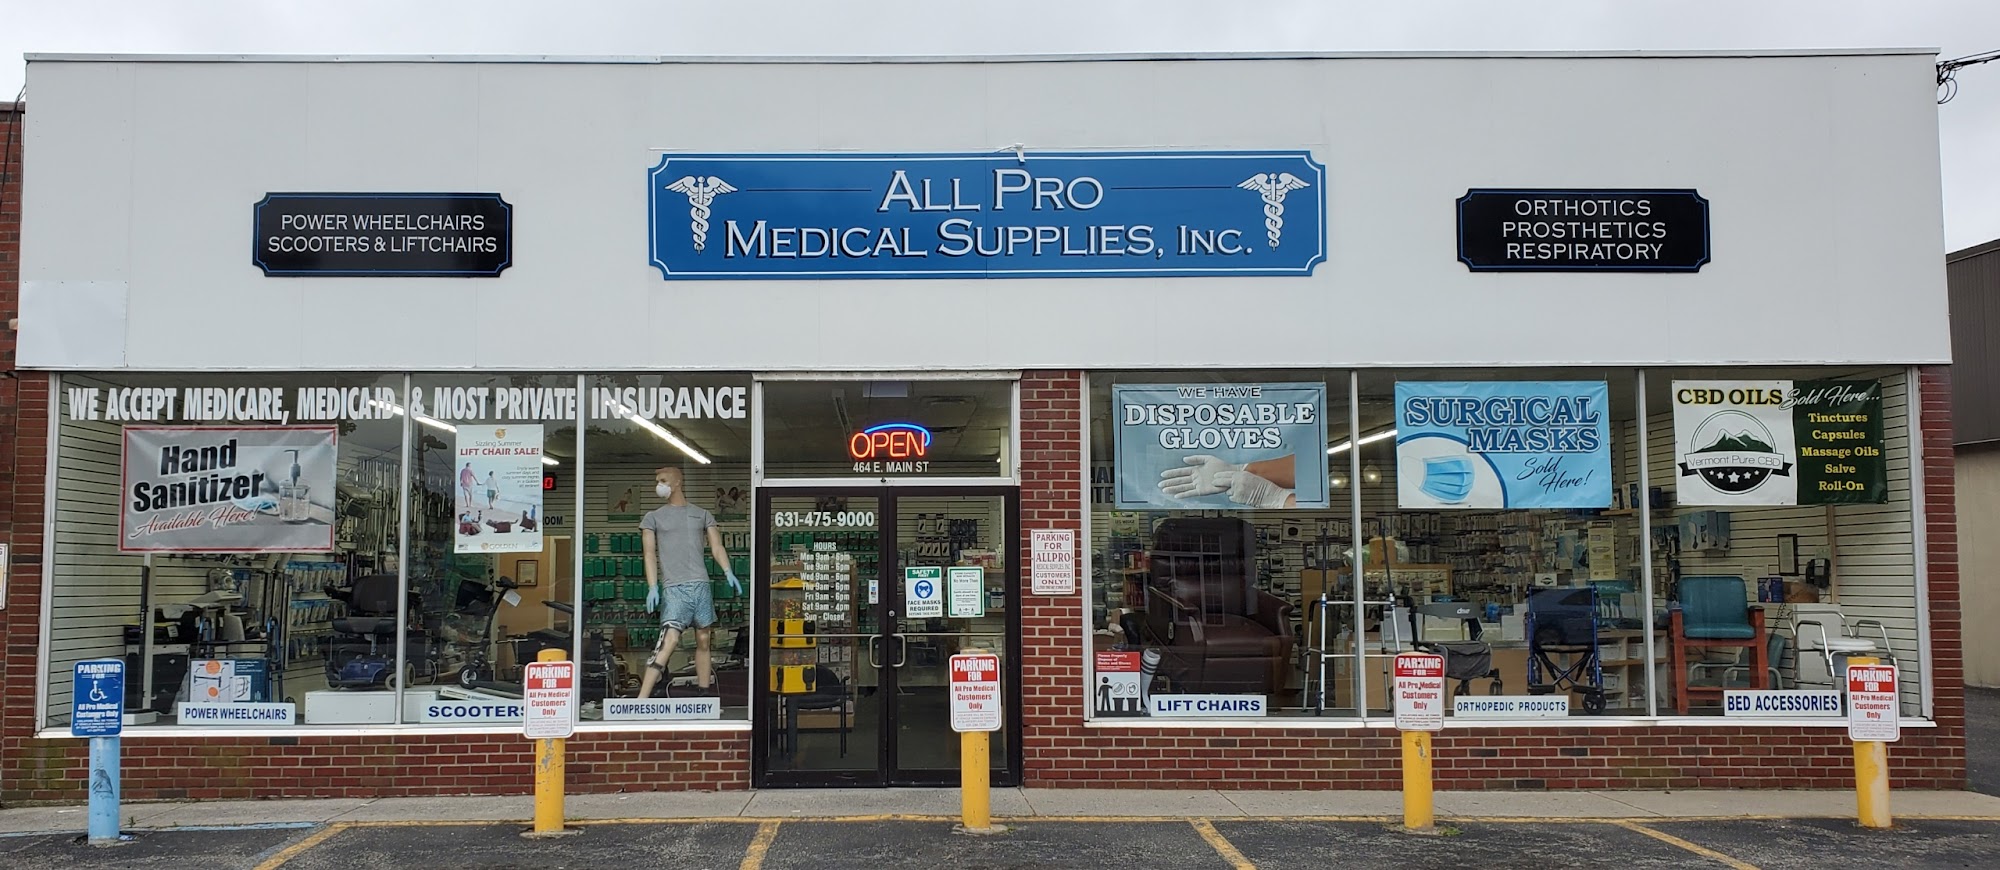 All Pro Medical Supplies